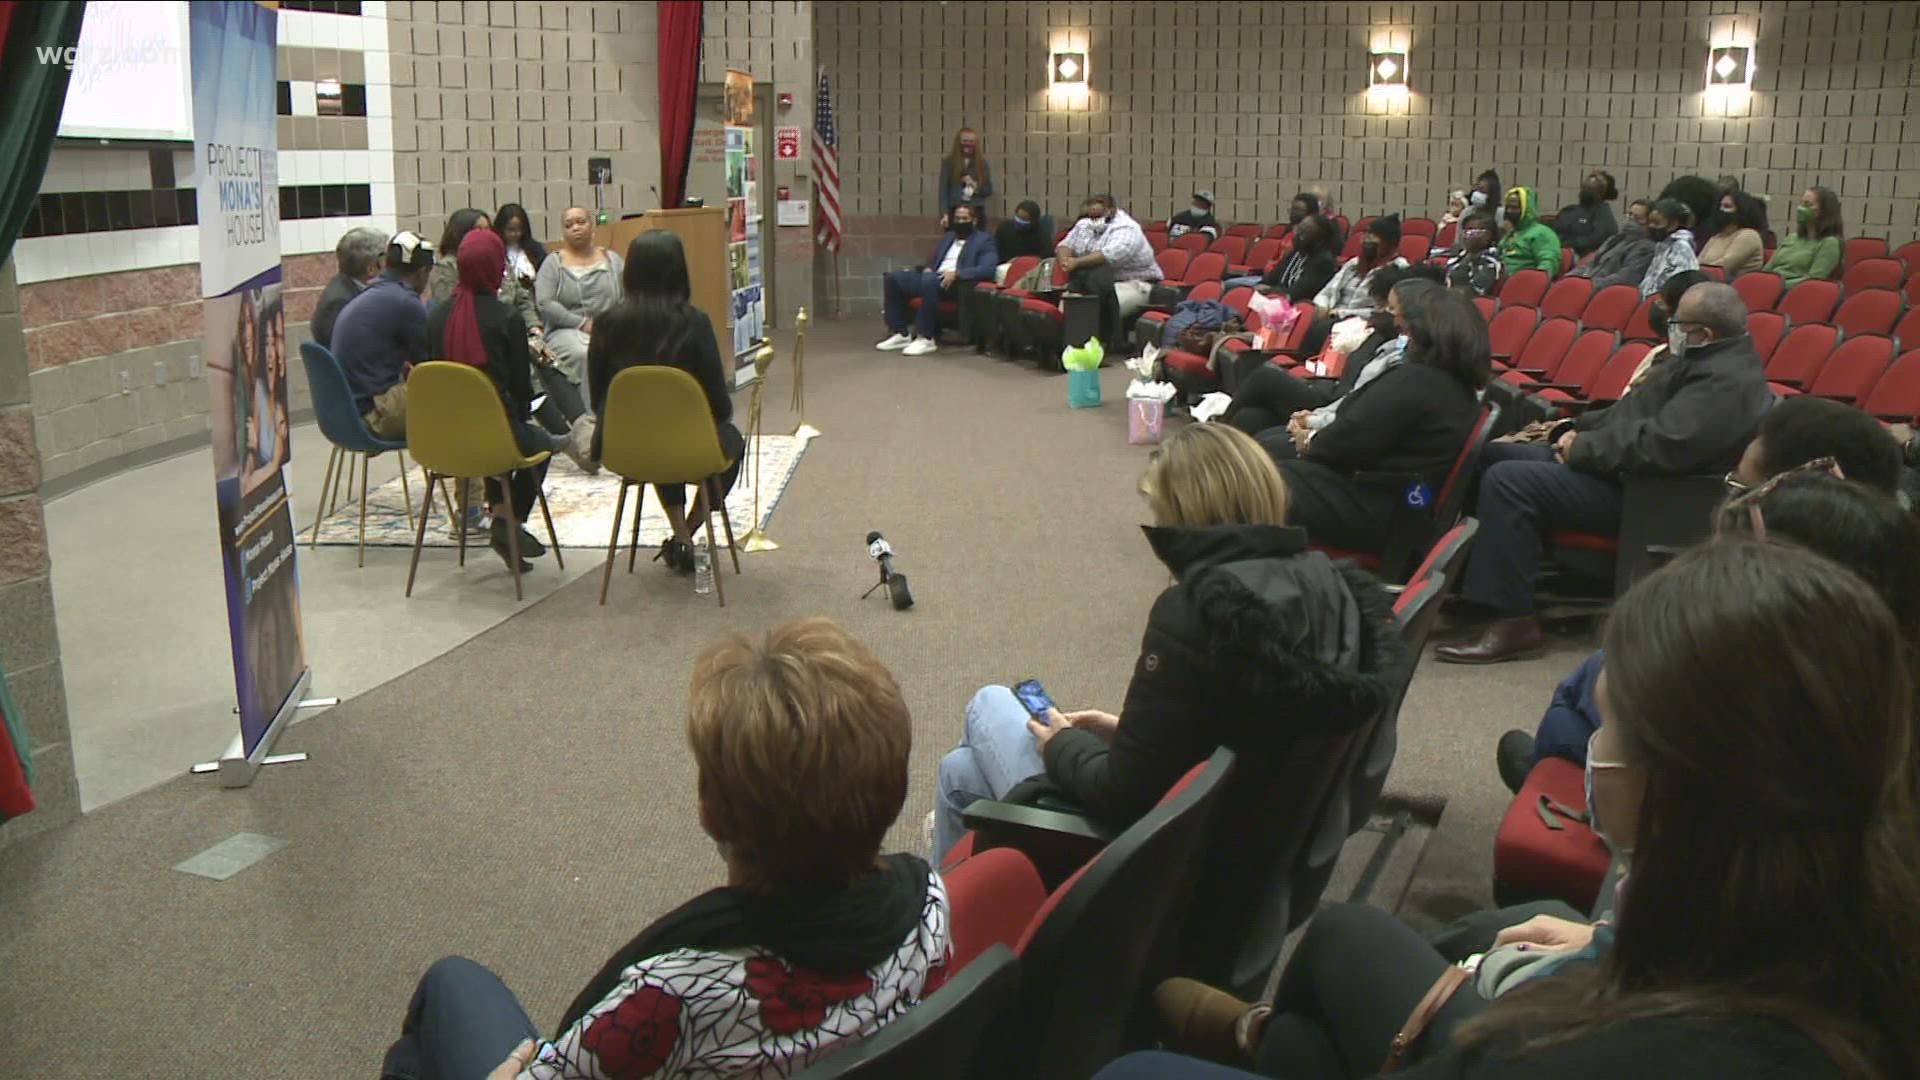 Young people and community activists discussed why children go missing in a town hall meeting today.